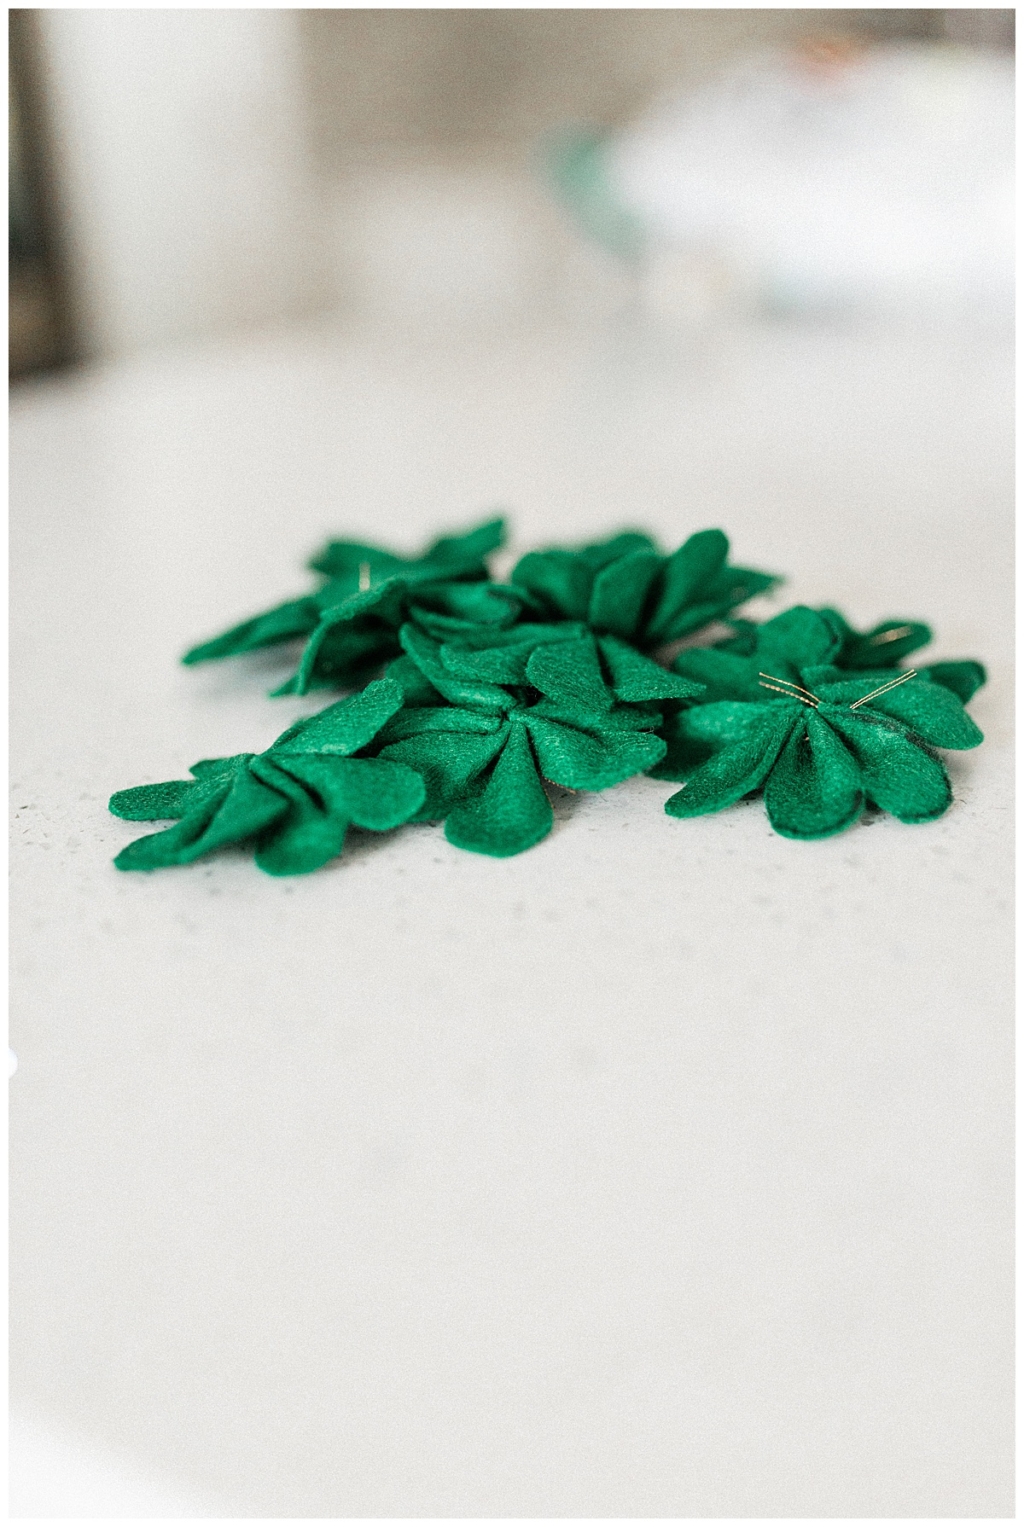 St Patrick's Day Shamrock Banner DIY a step by step instructions by twistmepretty.com